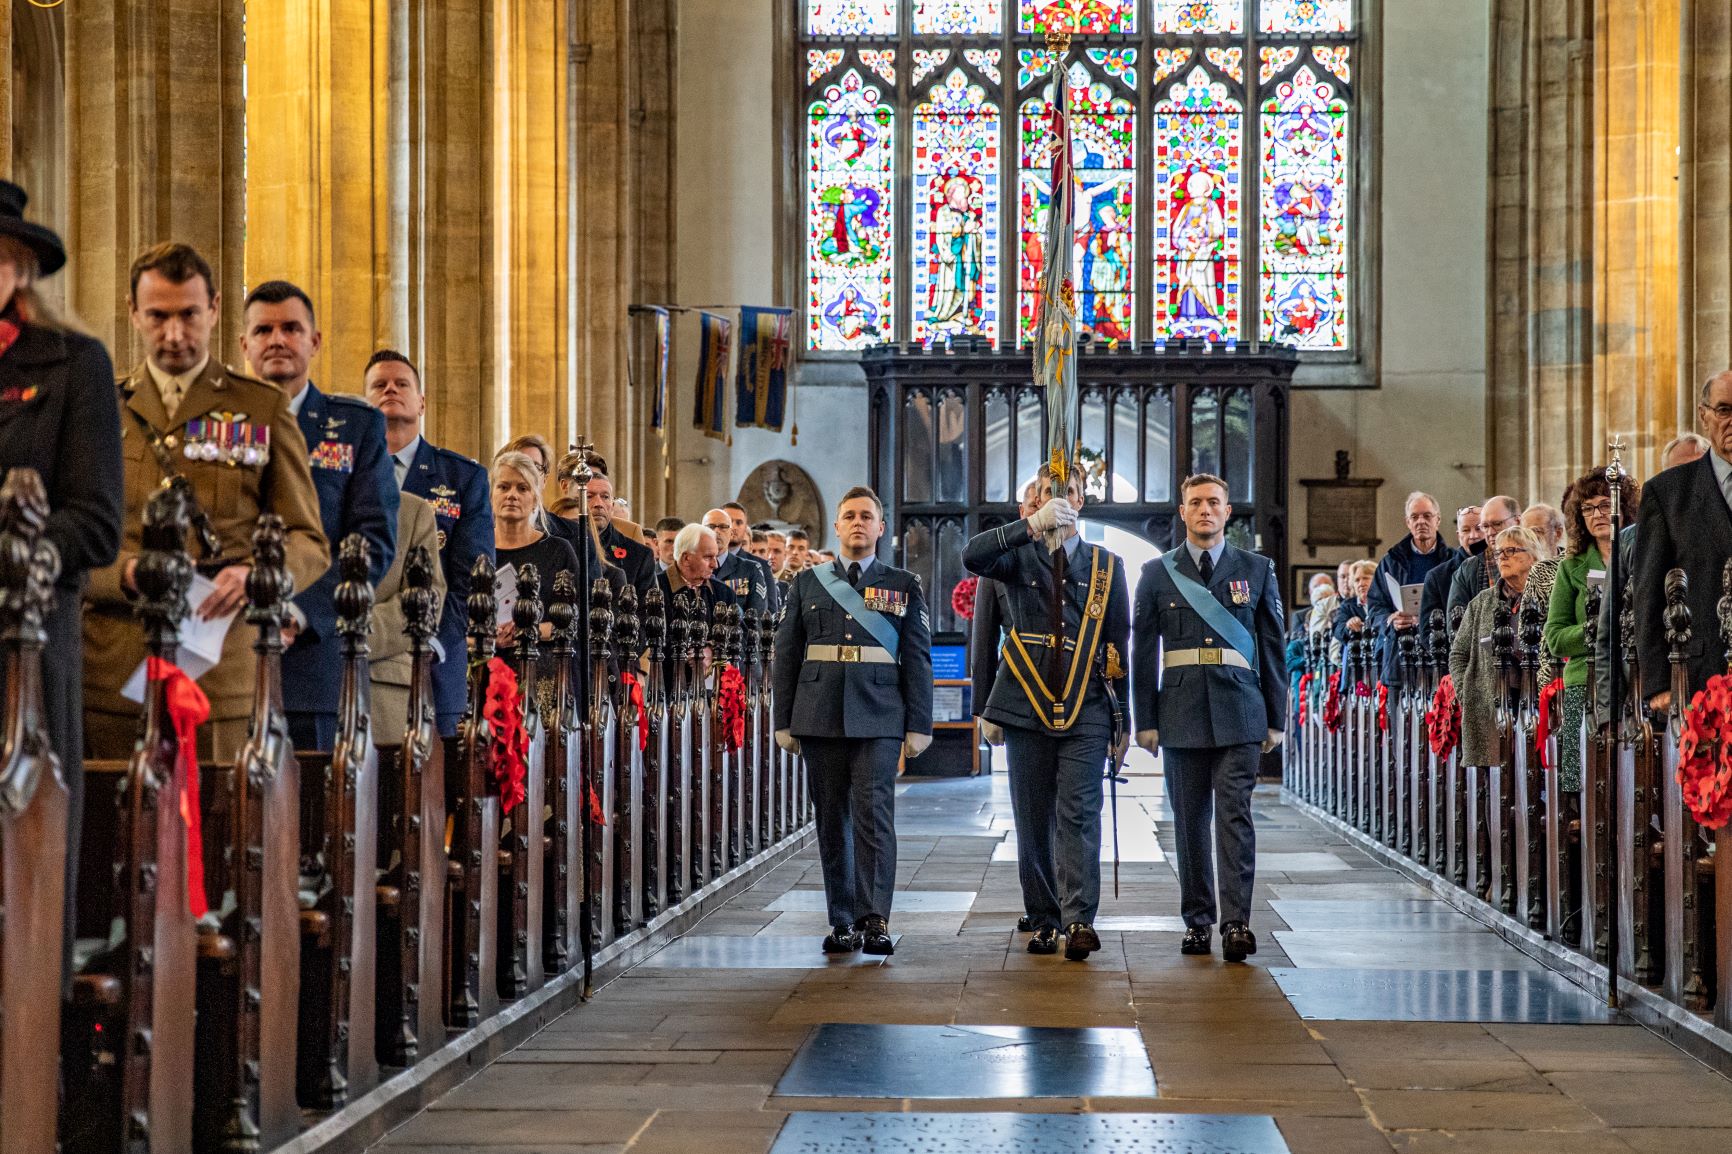 Image shows RAF aviators carrying colour flag into church.